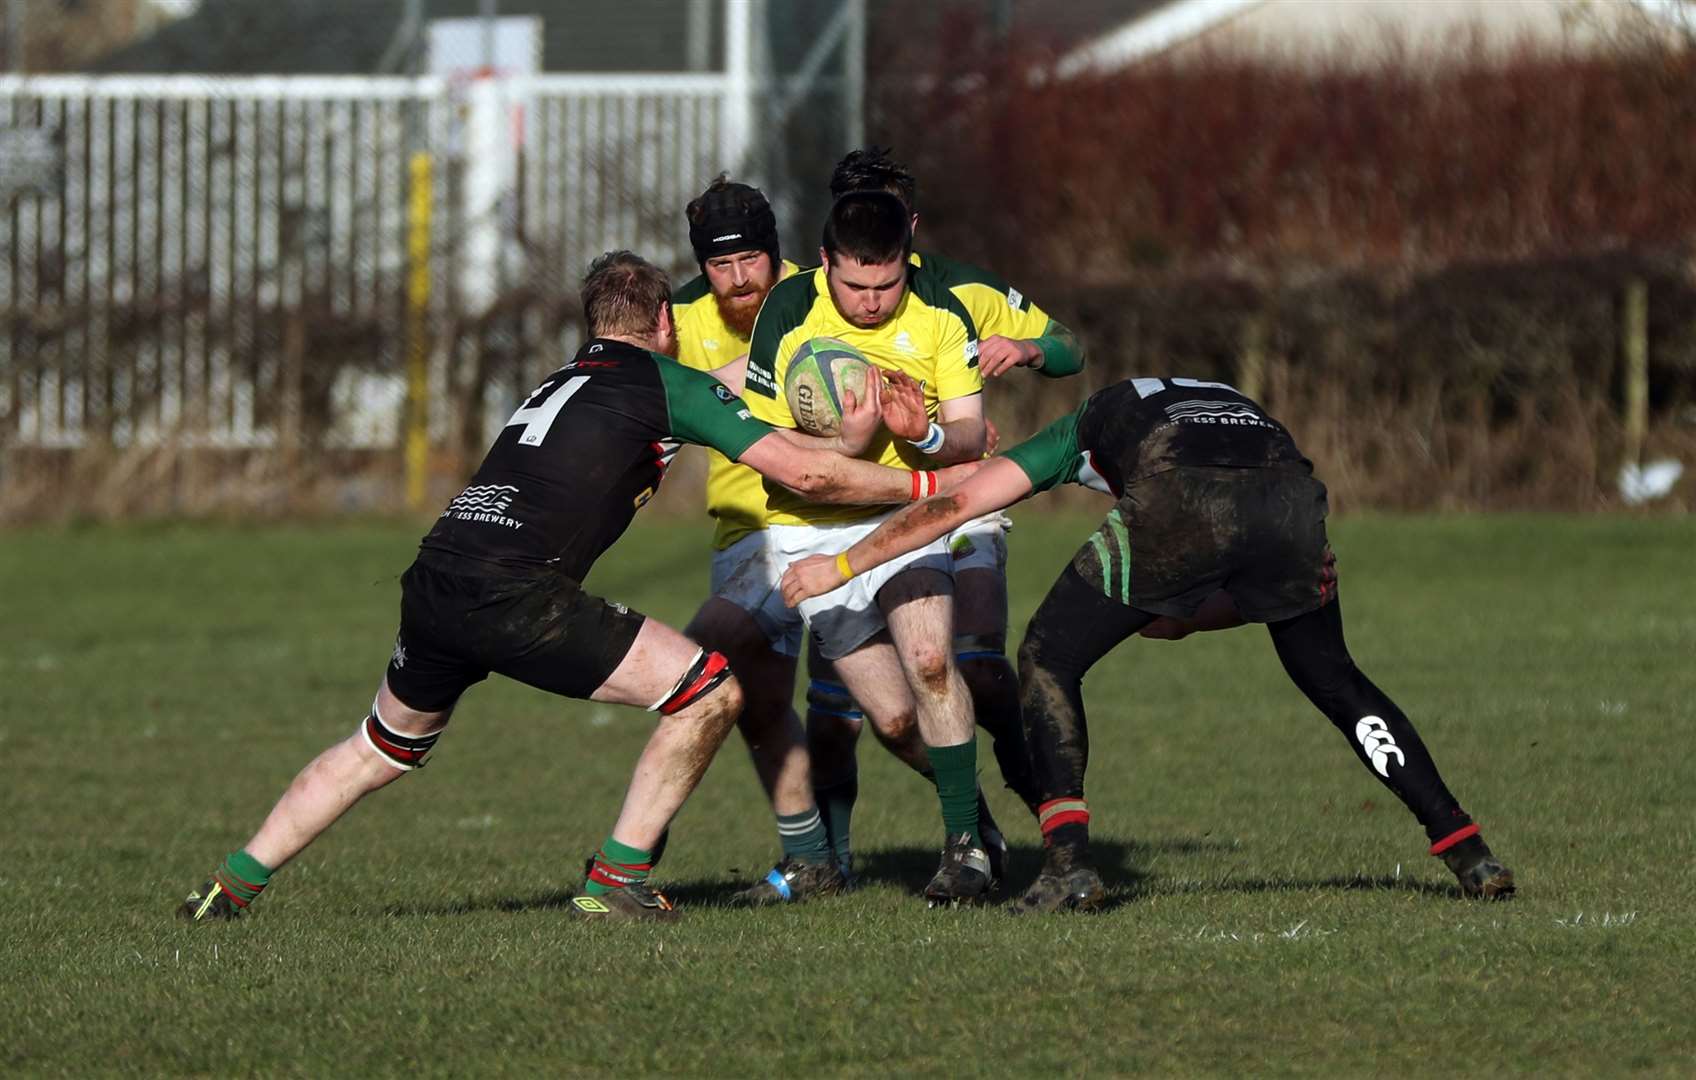 Ryan Cormack finds his path is blocked during the Yellows' encounter with Highland 3rd XV at Millbank. Picture: James Gunn